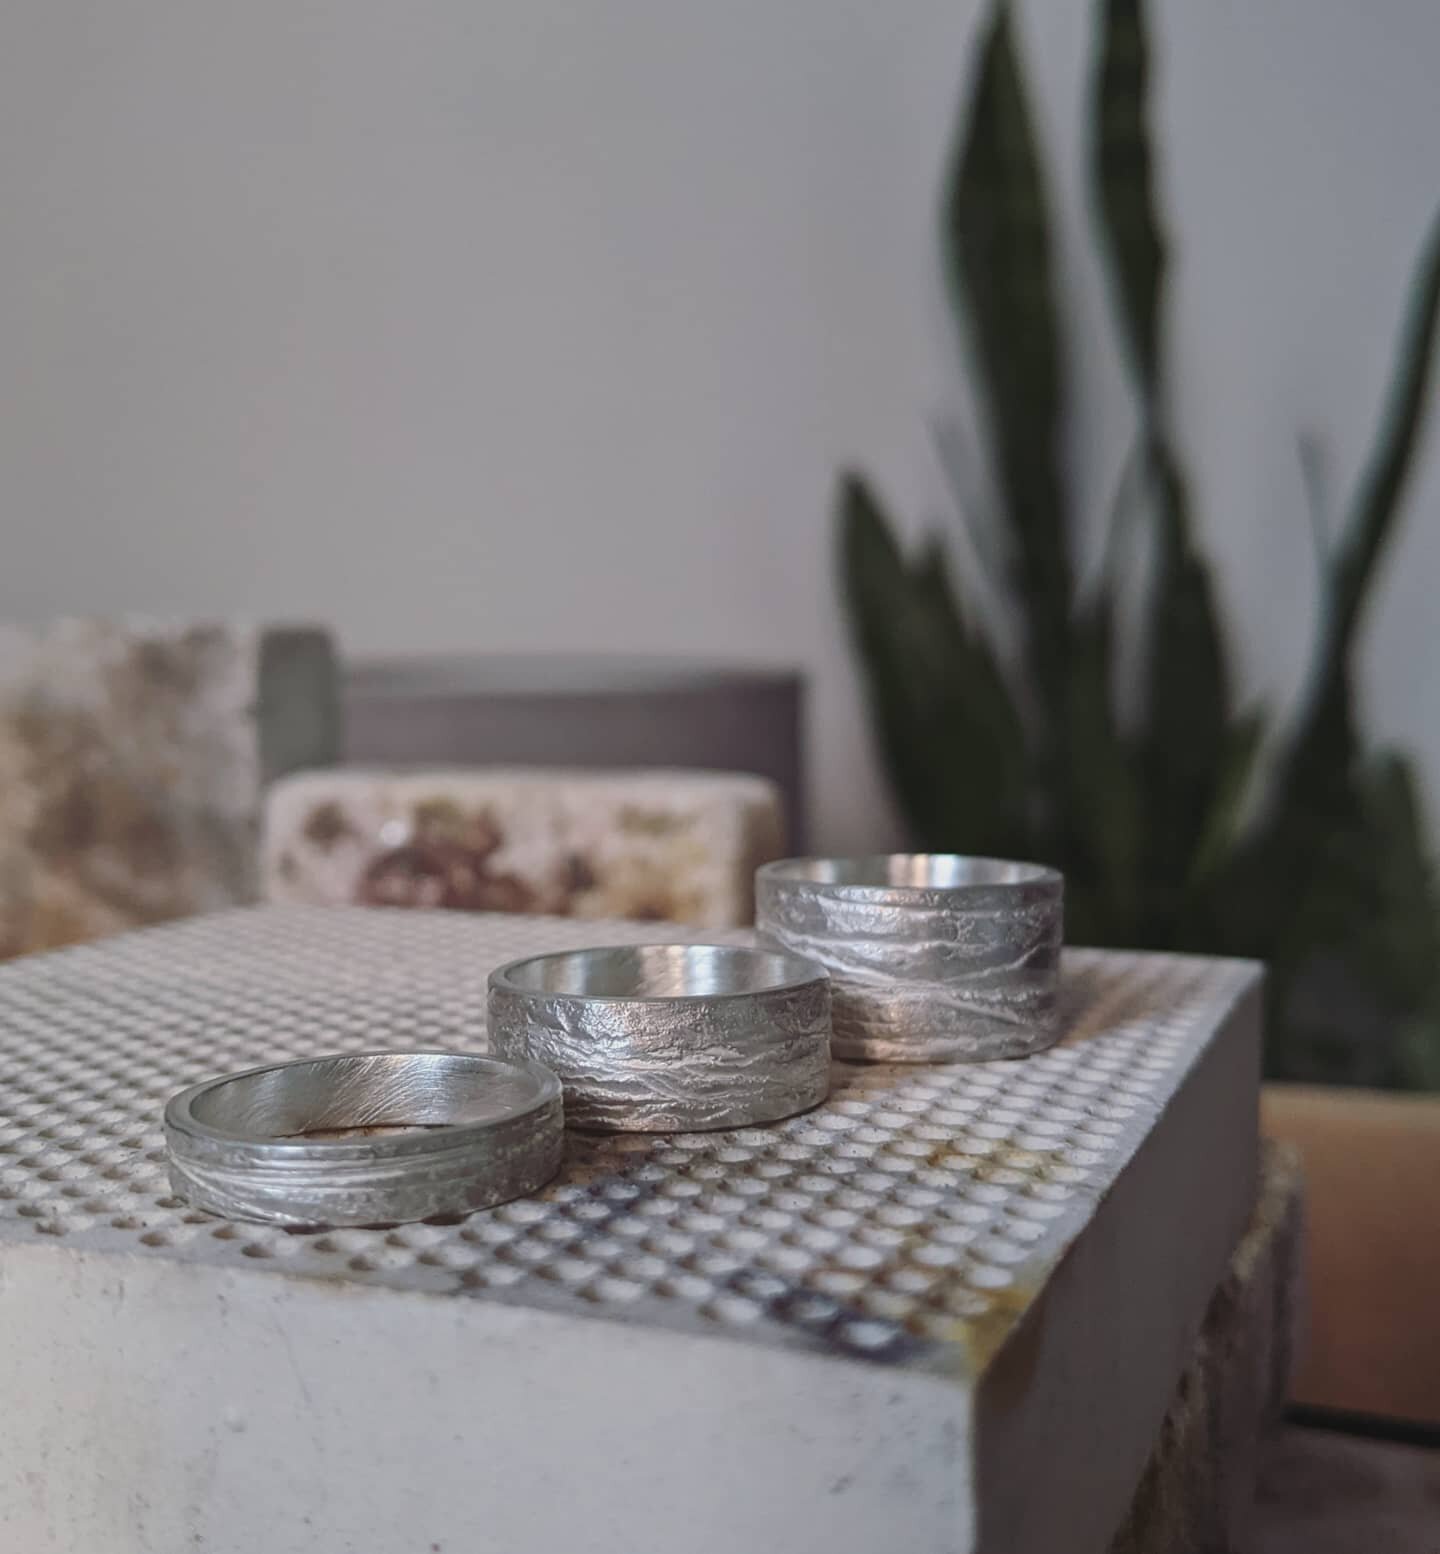 A little progress shot with the last of the daylight. Three hammer textured recycled silver rings in 4, 7 and 11mm widths.